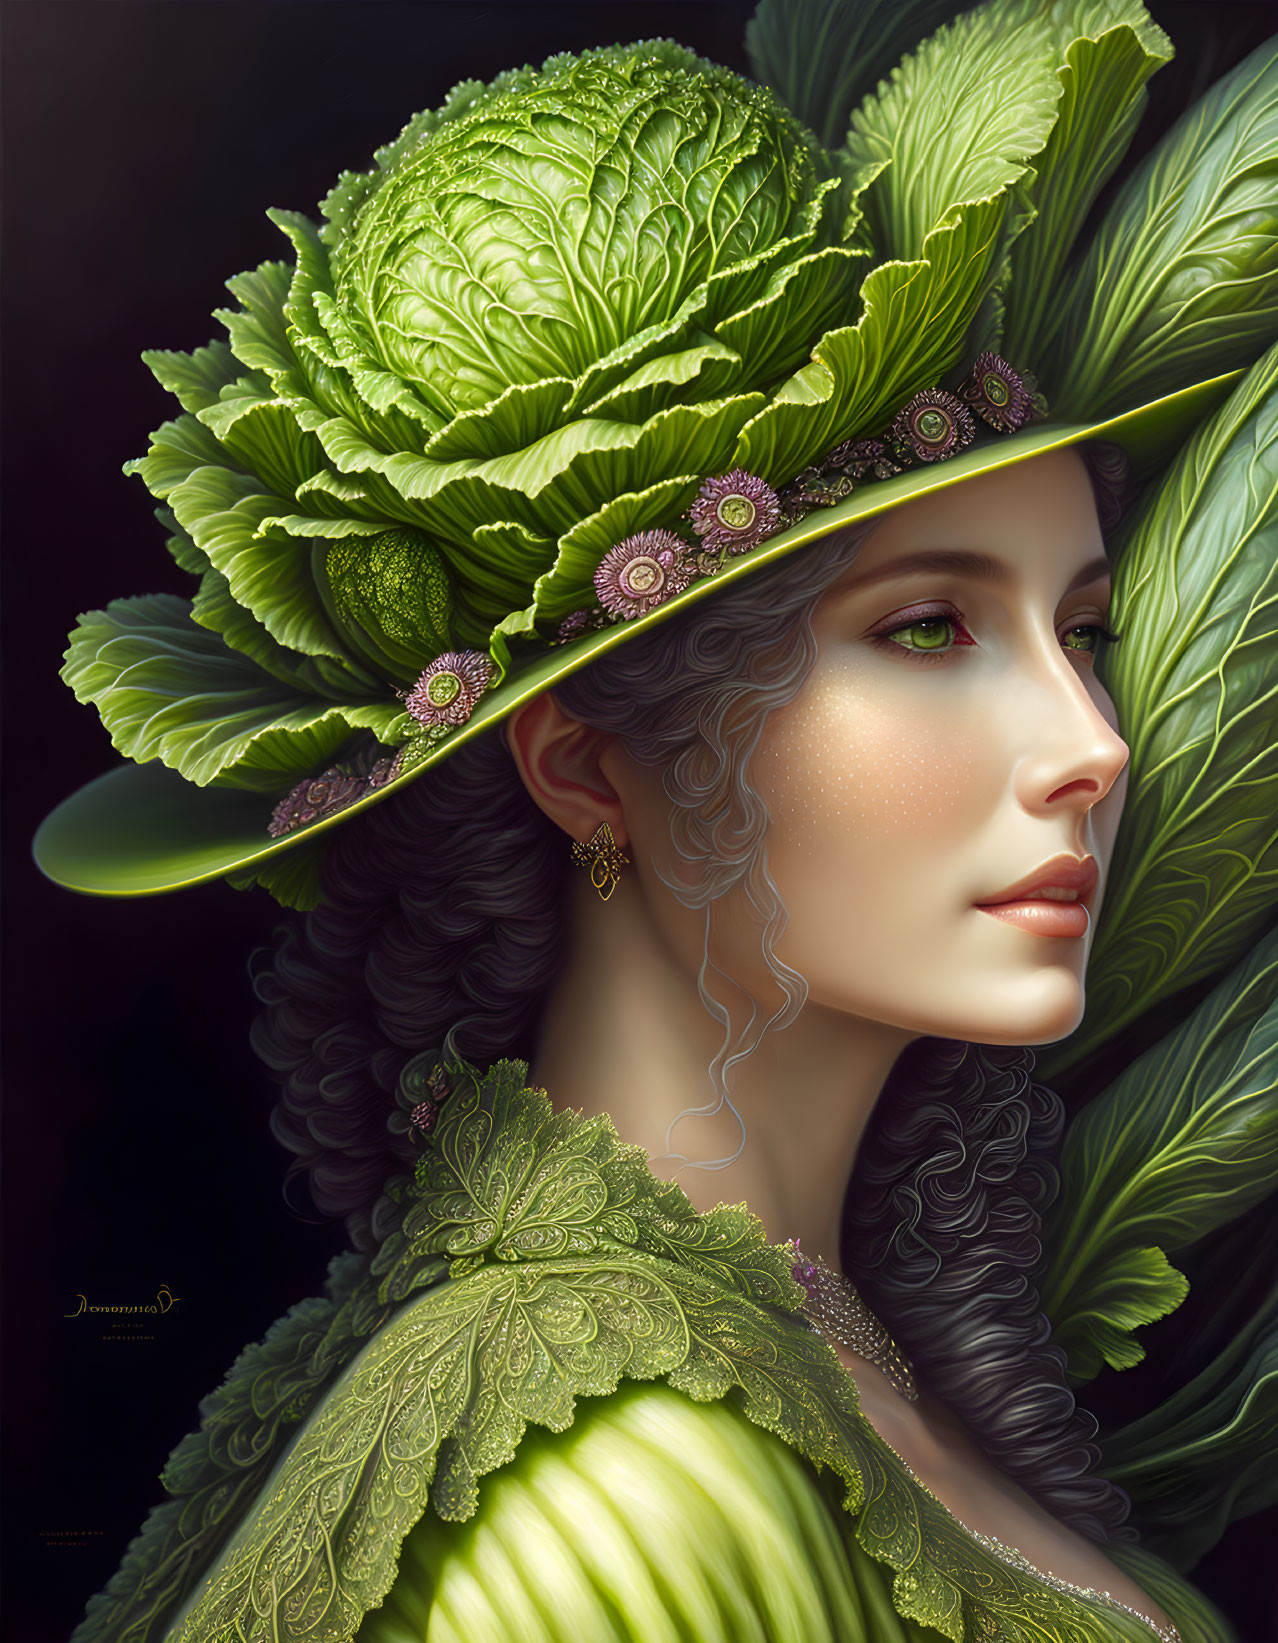 The Cabbage Hat by Dana Edwards